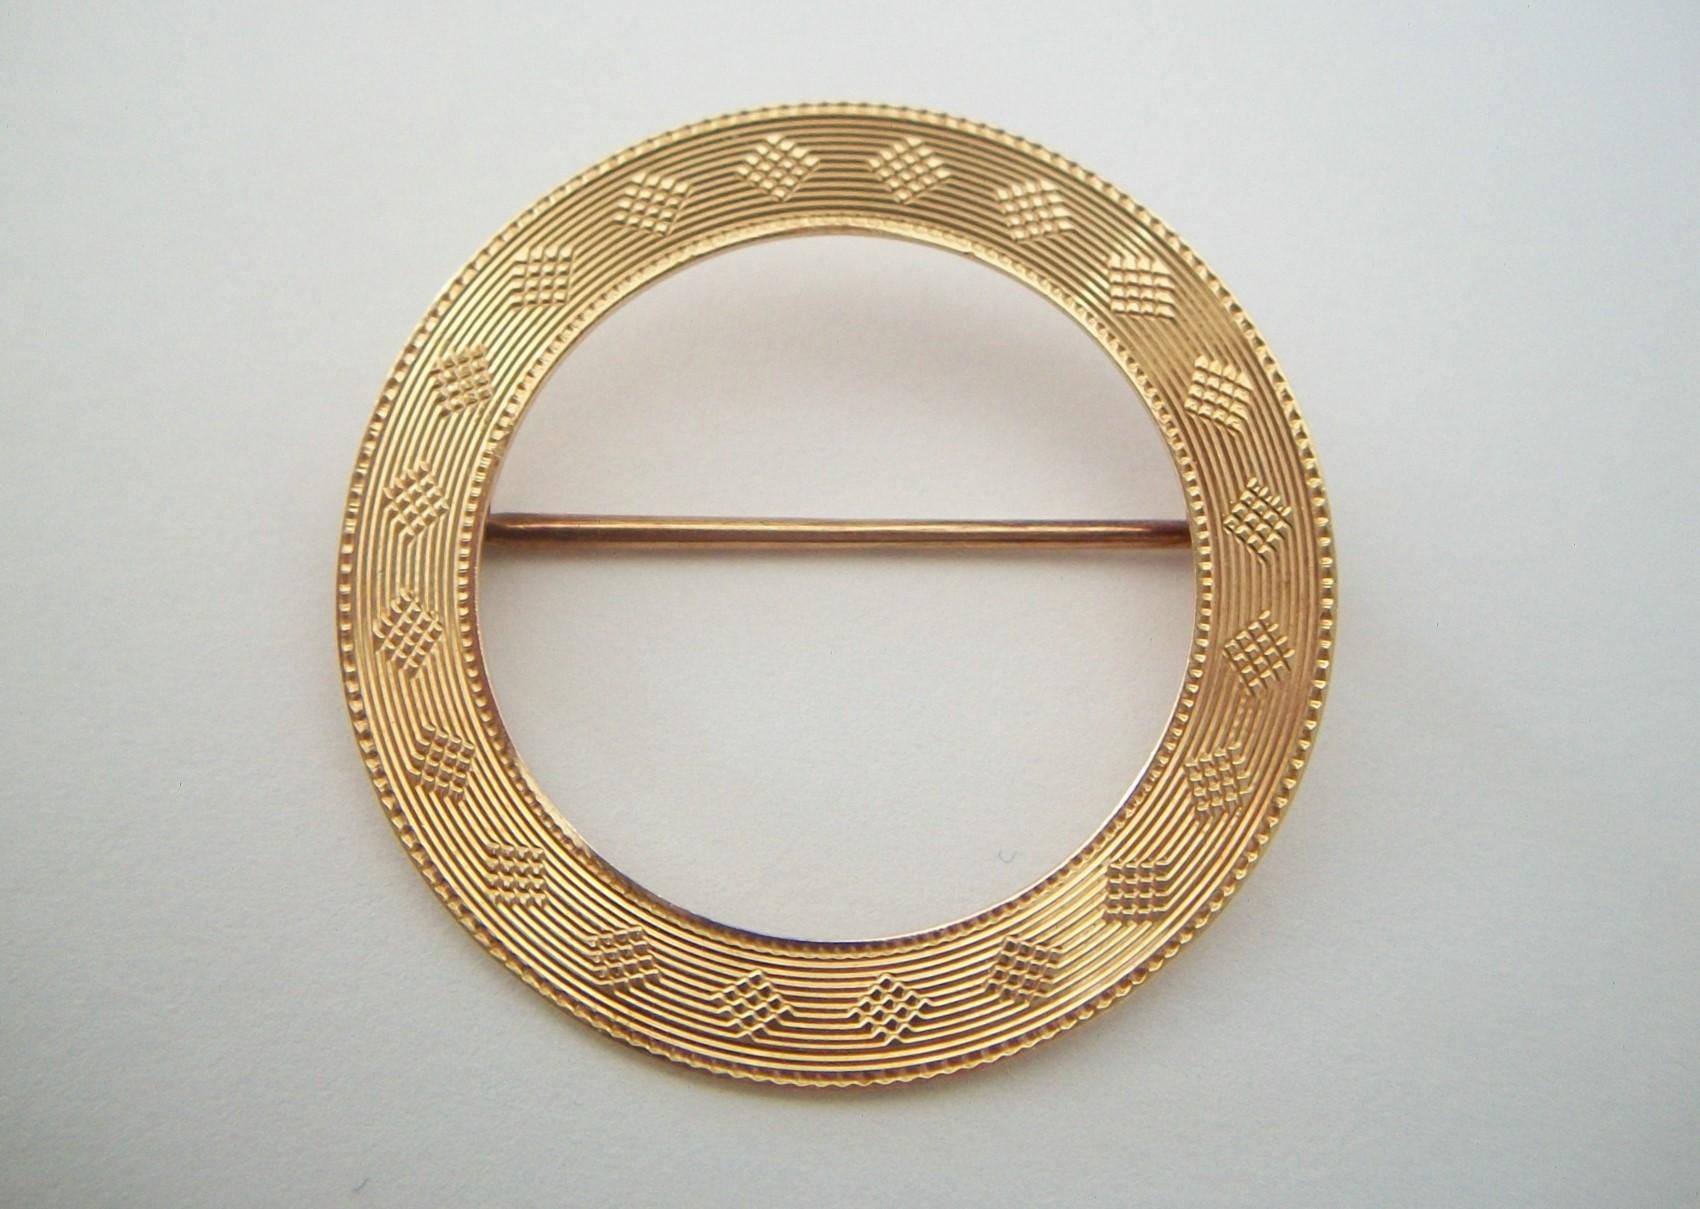 Art Deco 14K yellow gold engine turned circle brooch - refined and elegant - fine quality - early hand made catch with safety latch - hand made hinge and pin - marked 14K on the catch - old auction house inventory number etched to back - unsigned -